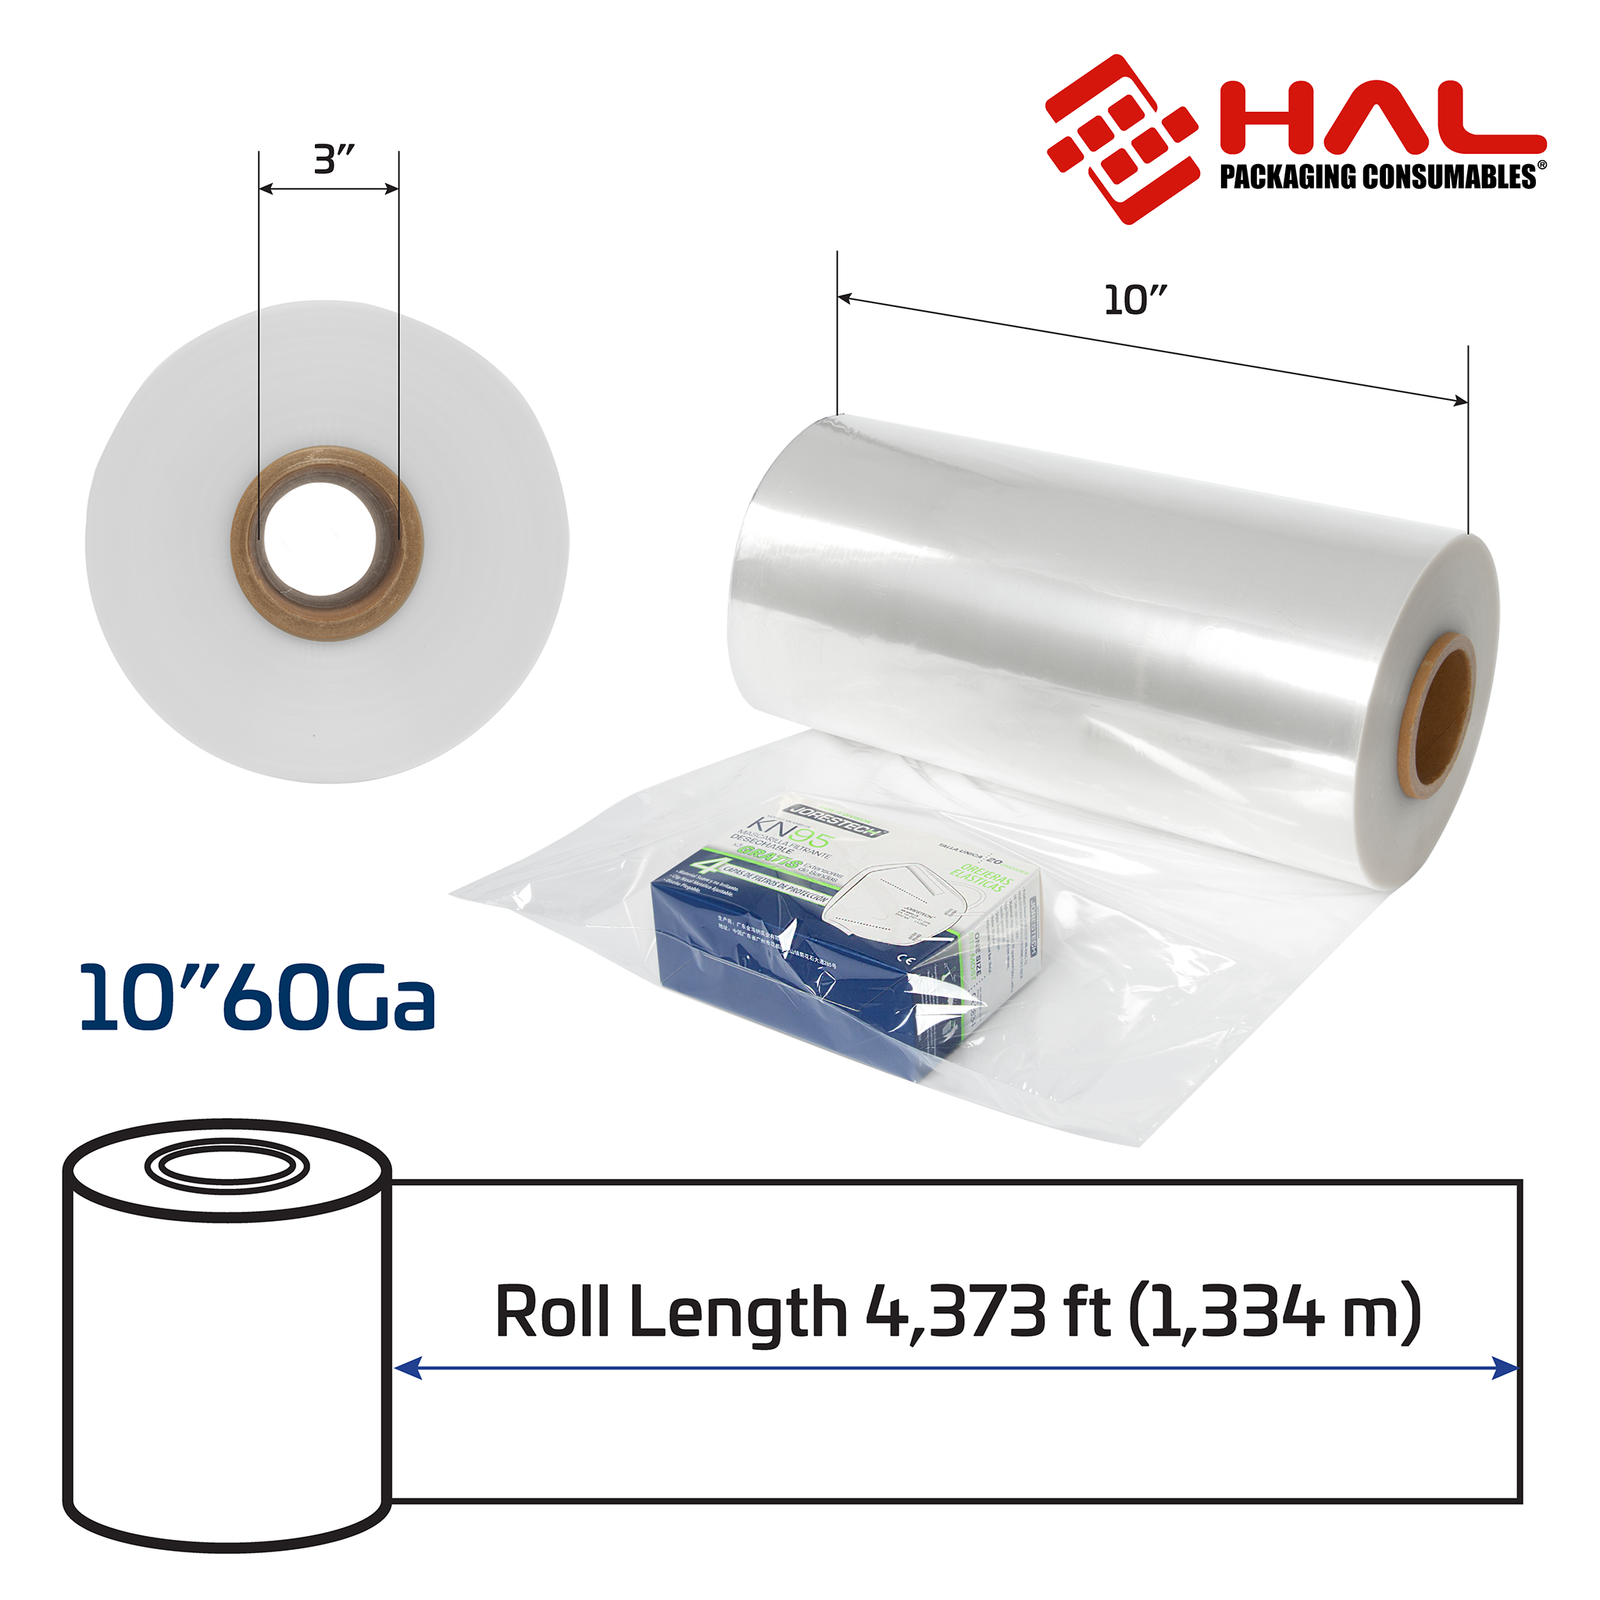 Measurements of the 60 gauge shrink wrapping film tube. 3 inch diameter of the inner core, and 10 inch width with a 4,373 ft. length.